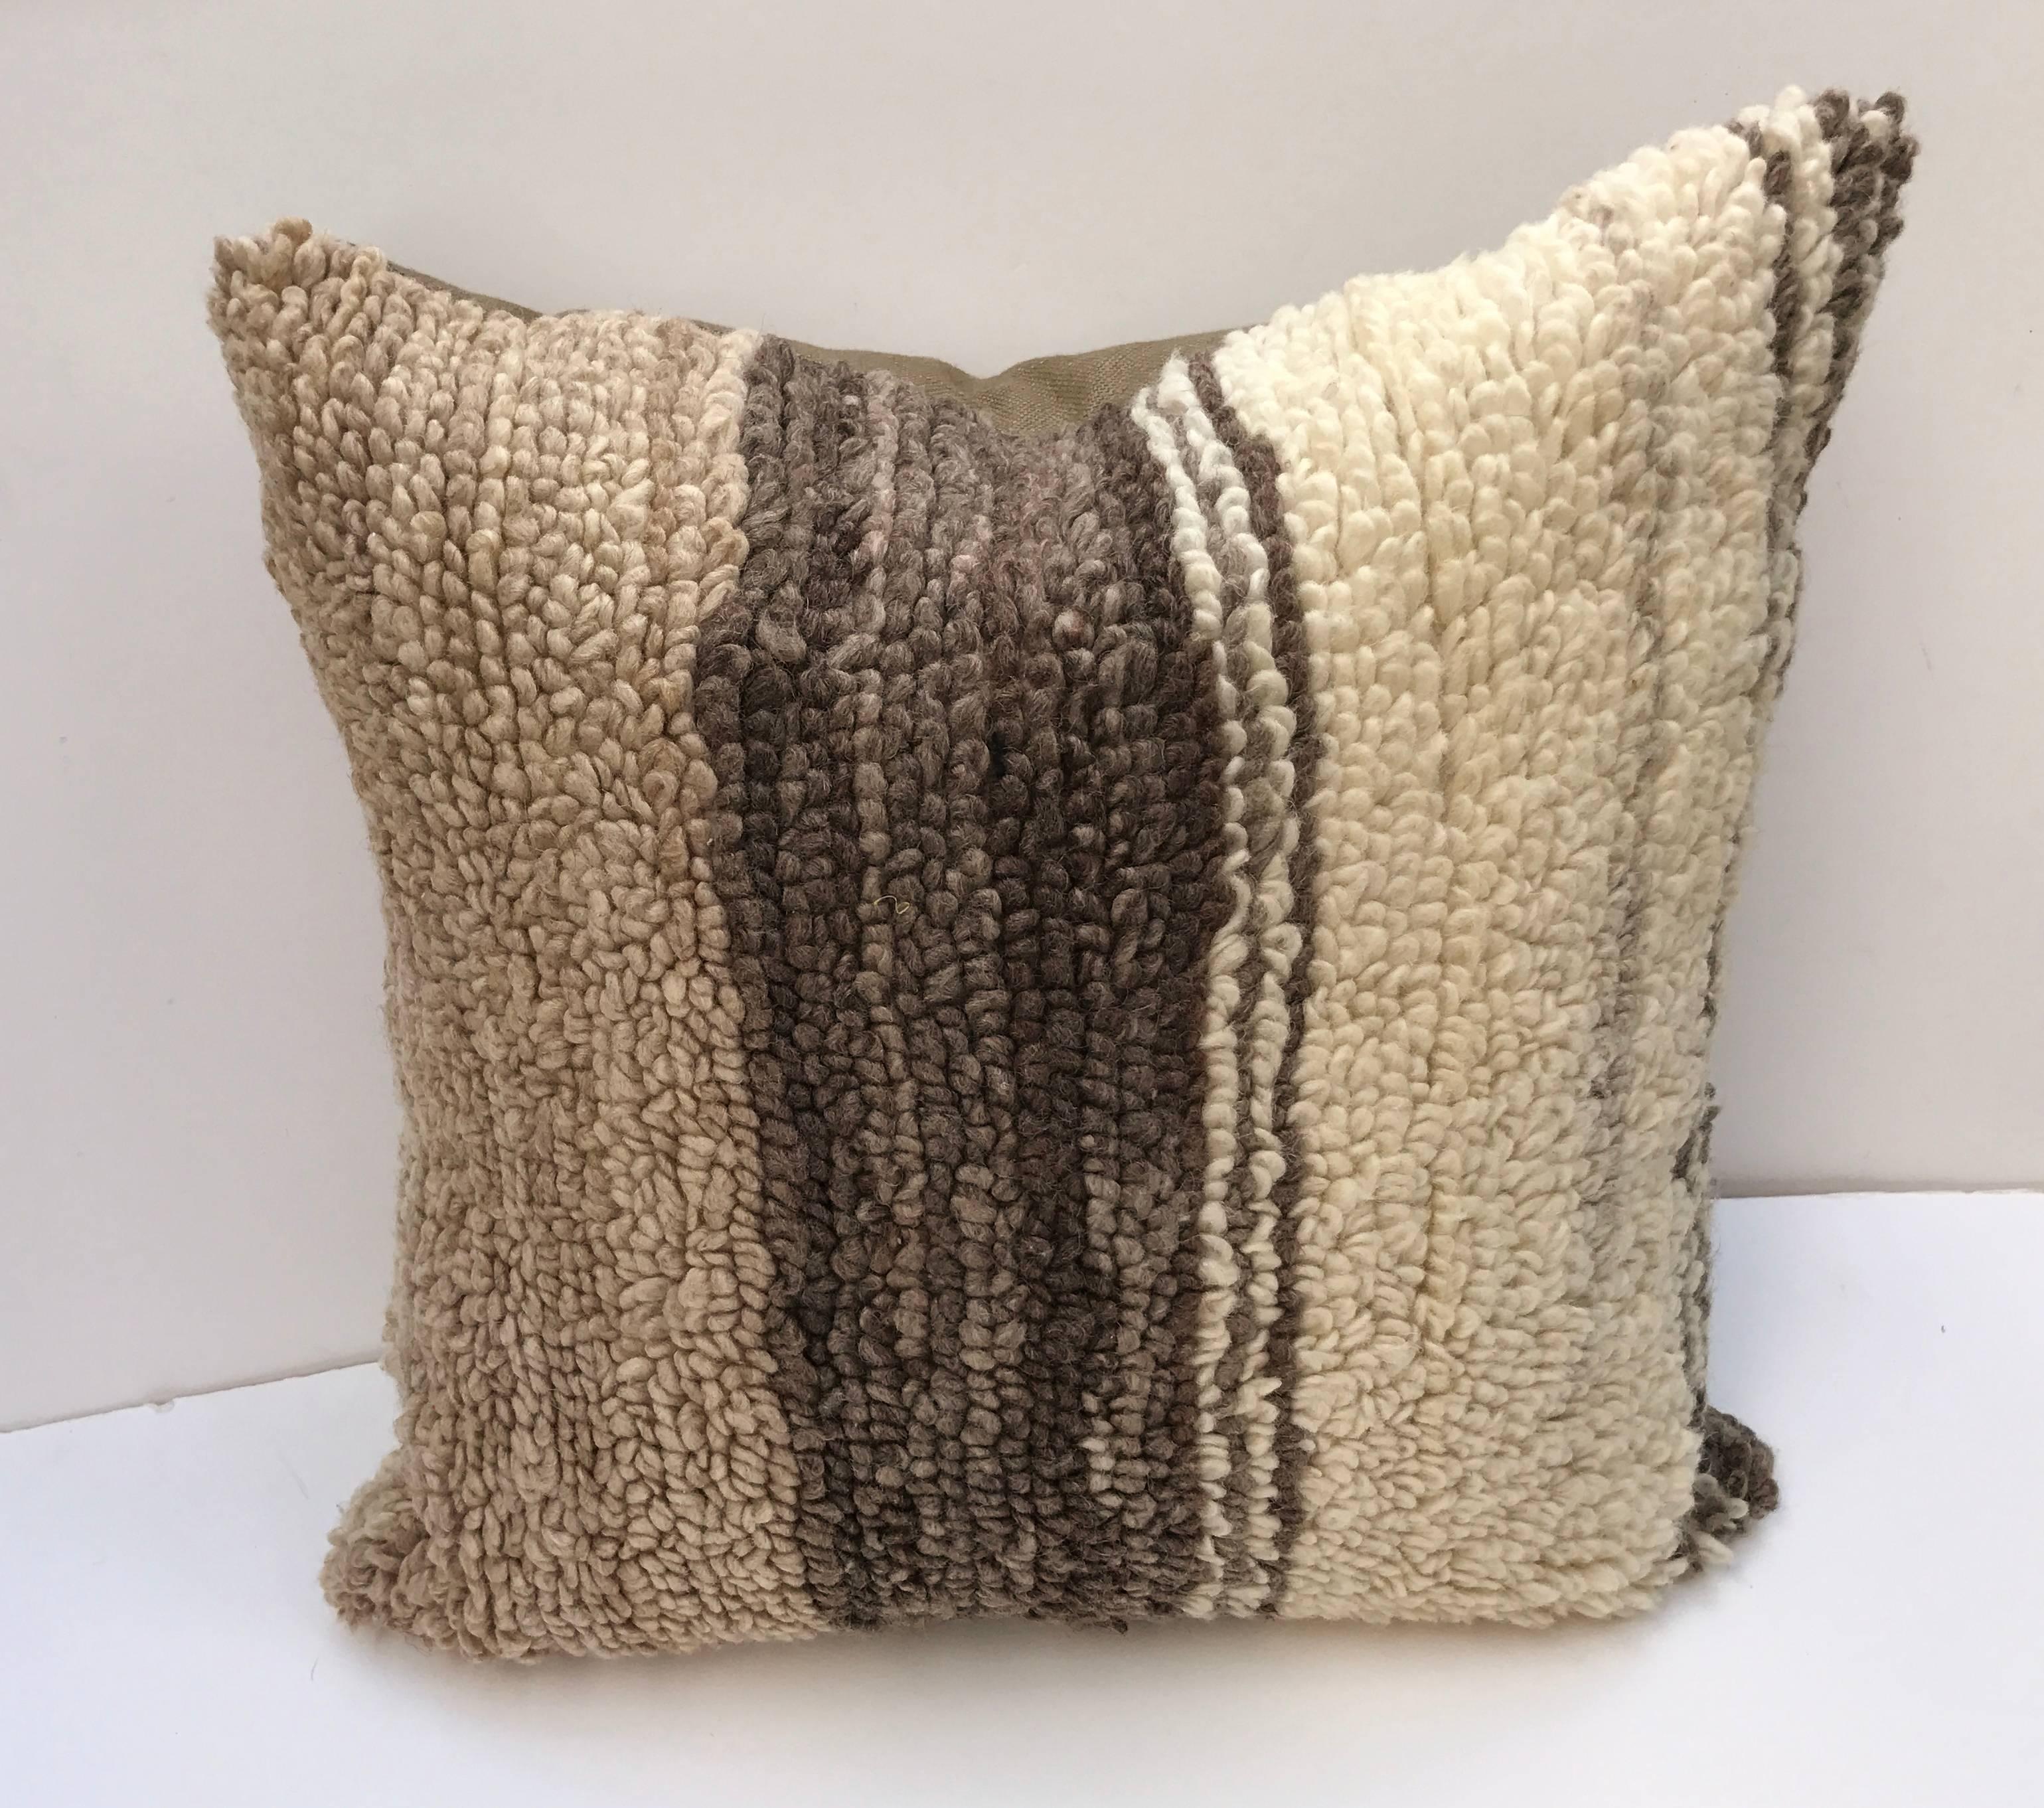 Custom pillow cut from a vintage hand loomed wool Moroccan Beni Ouarain Berber rug from the Atlas Mountains. Wool is soft and lustrous with all natural color. Pillow is backed in linen, filled with an insert of 50/50 down and feathers and hand-sewn